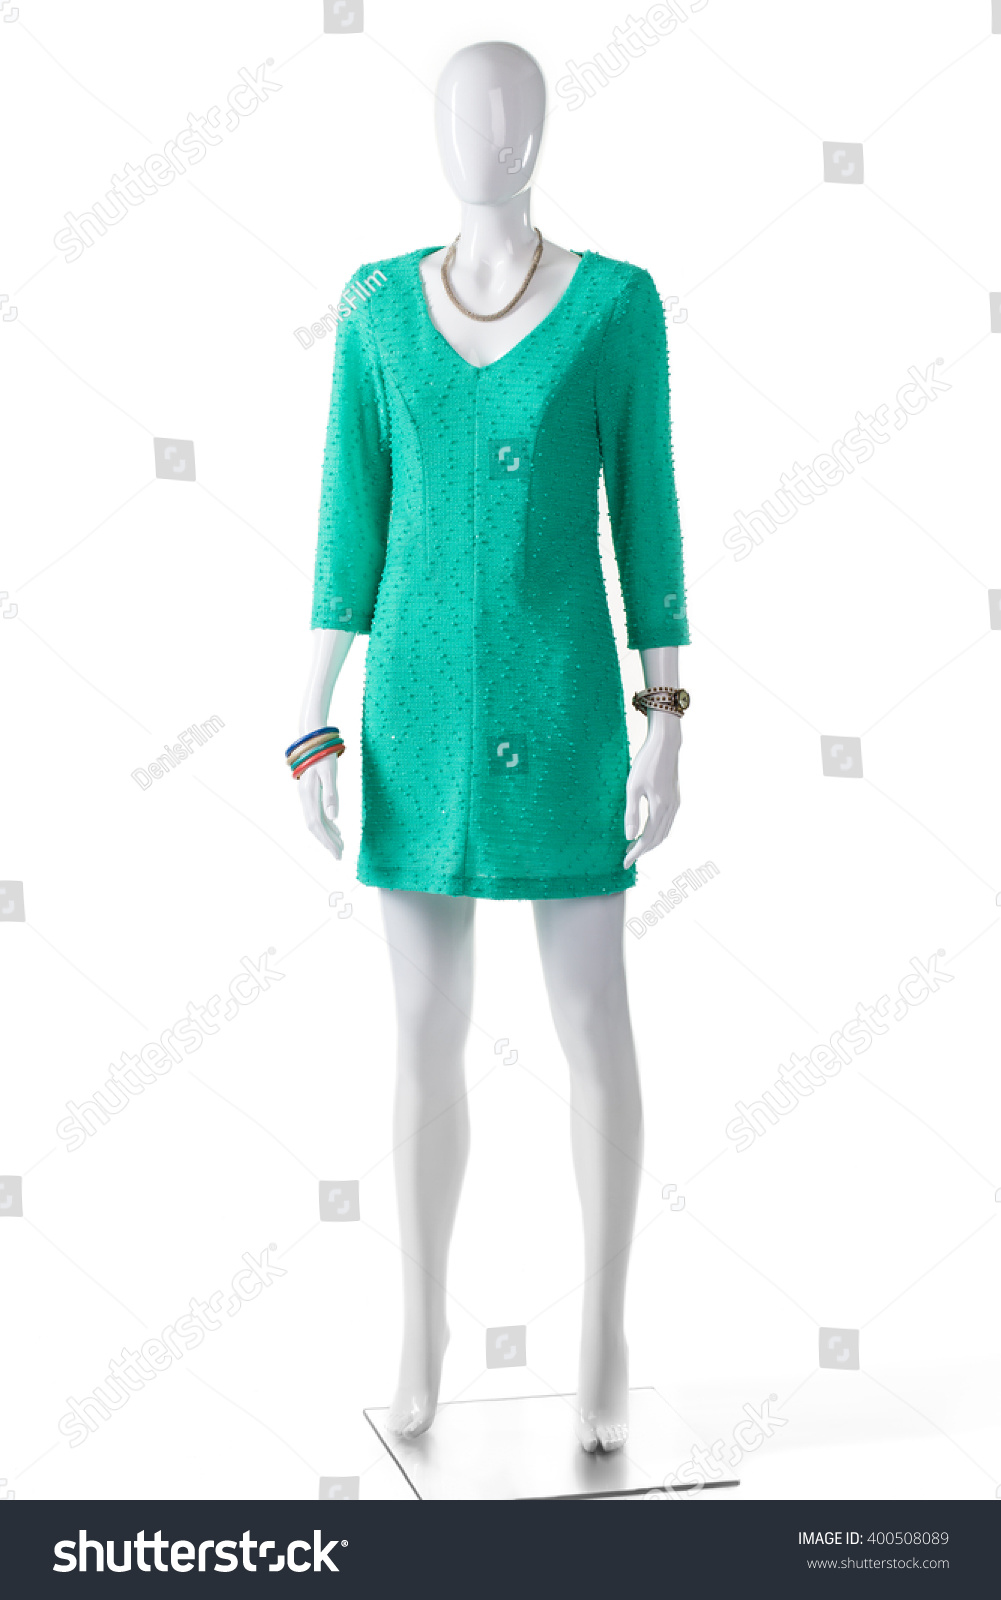 Casual Turquoise Dress On Mannequin Female Stock Photo 400508089 |  Shutterstock